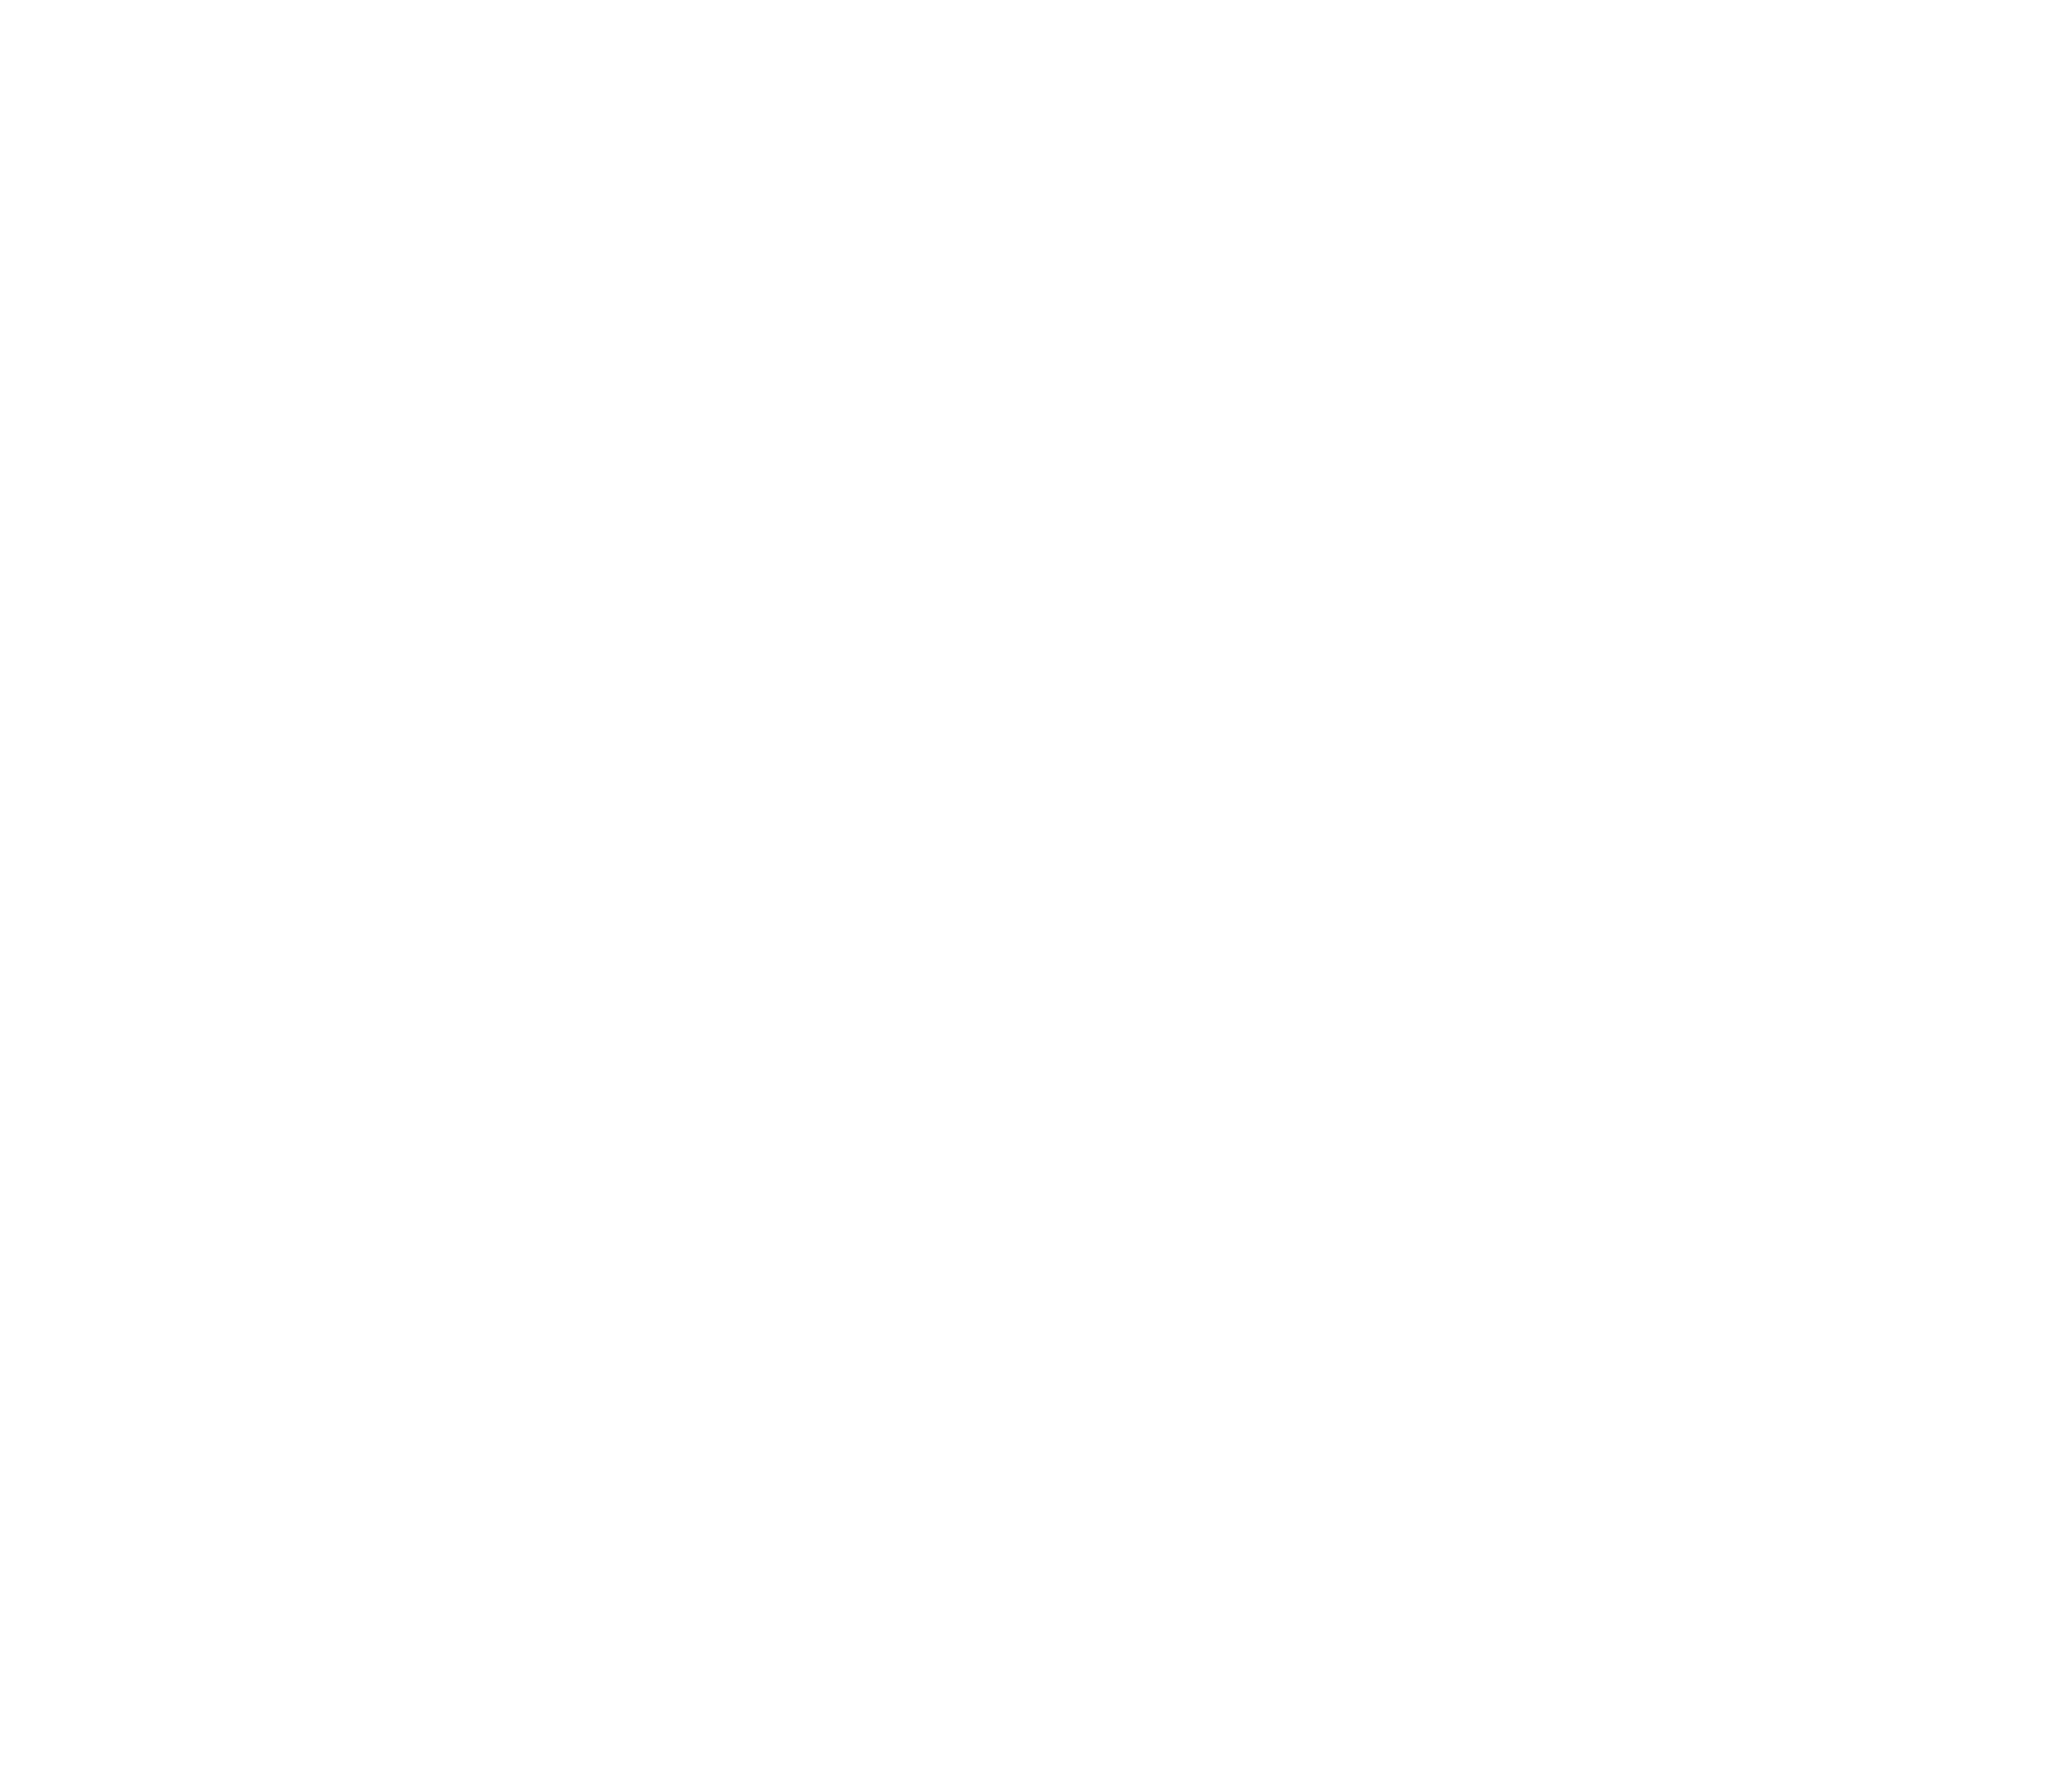 YV Concepts